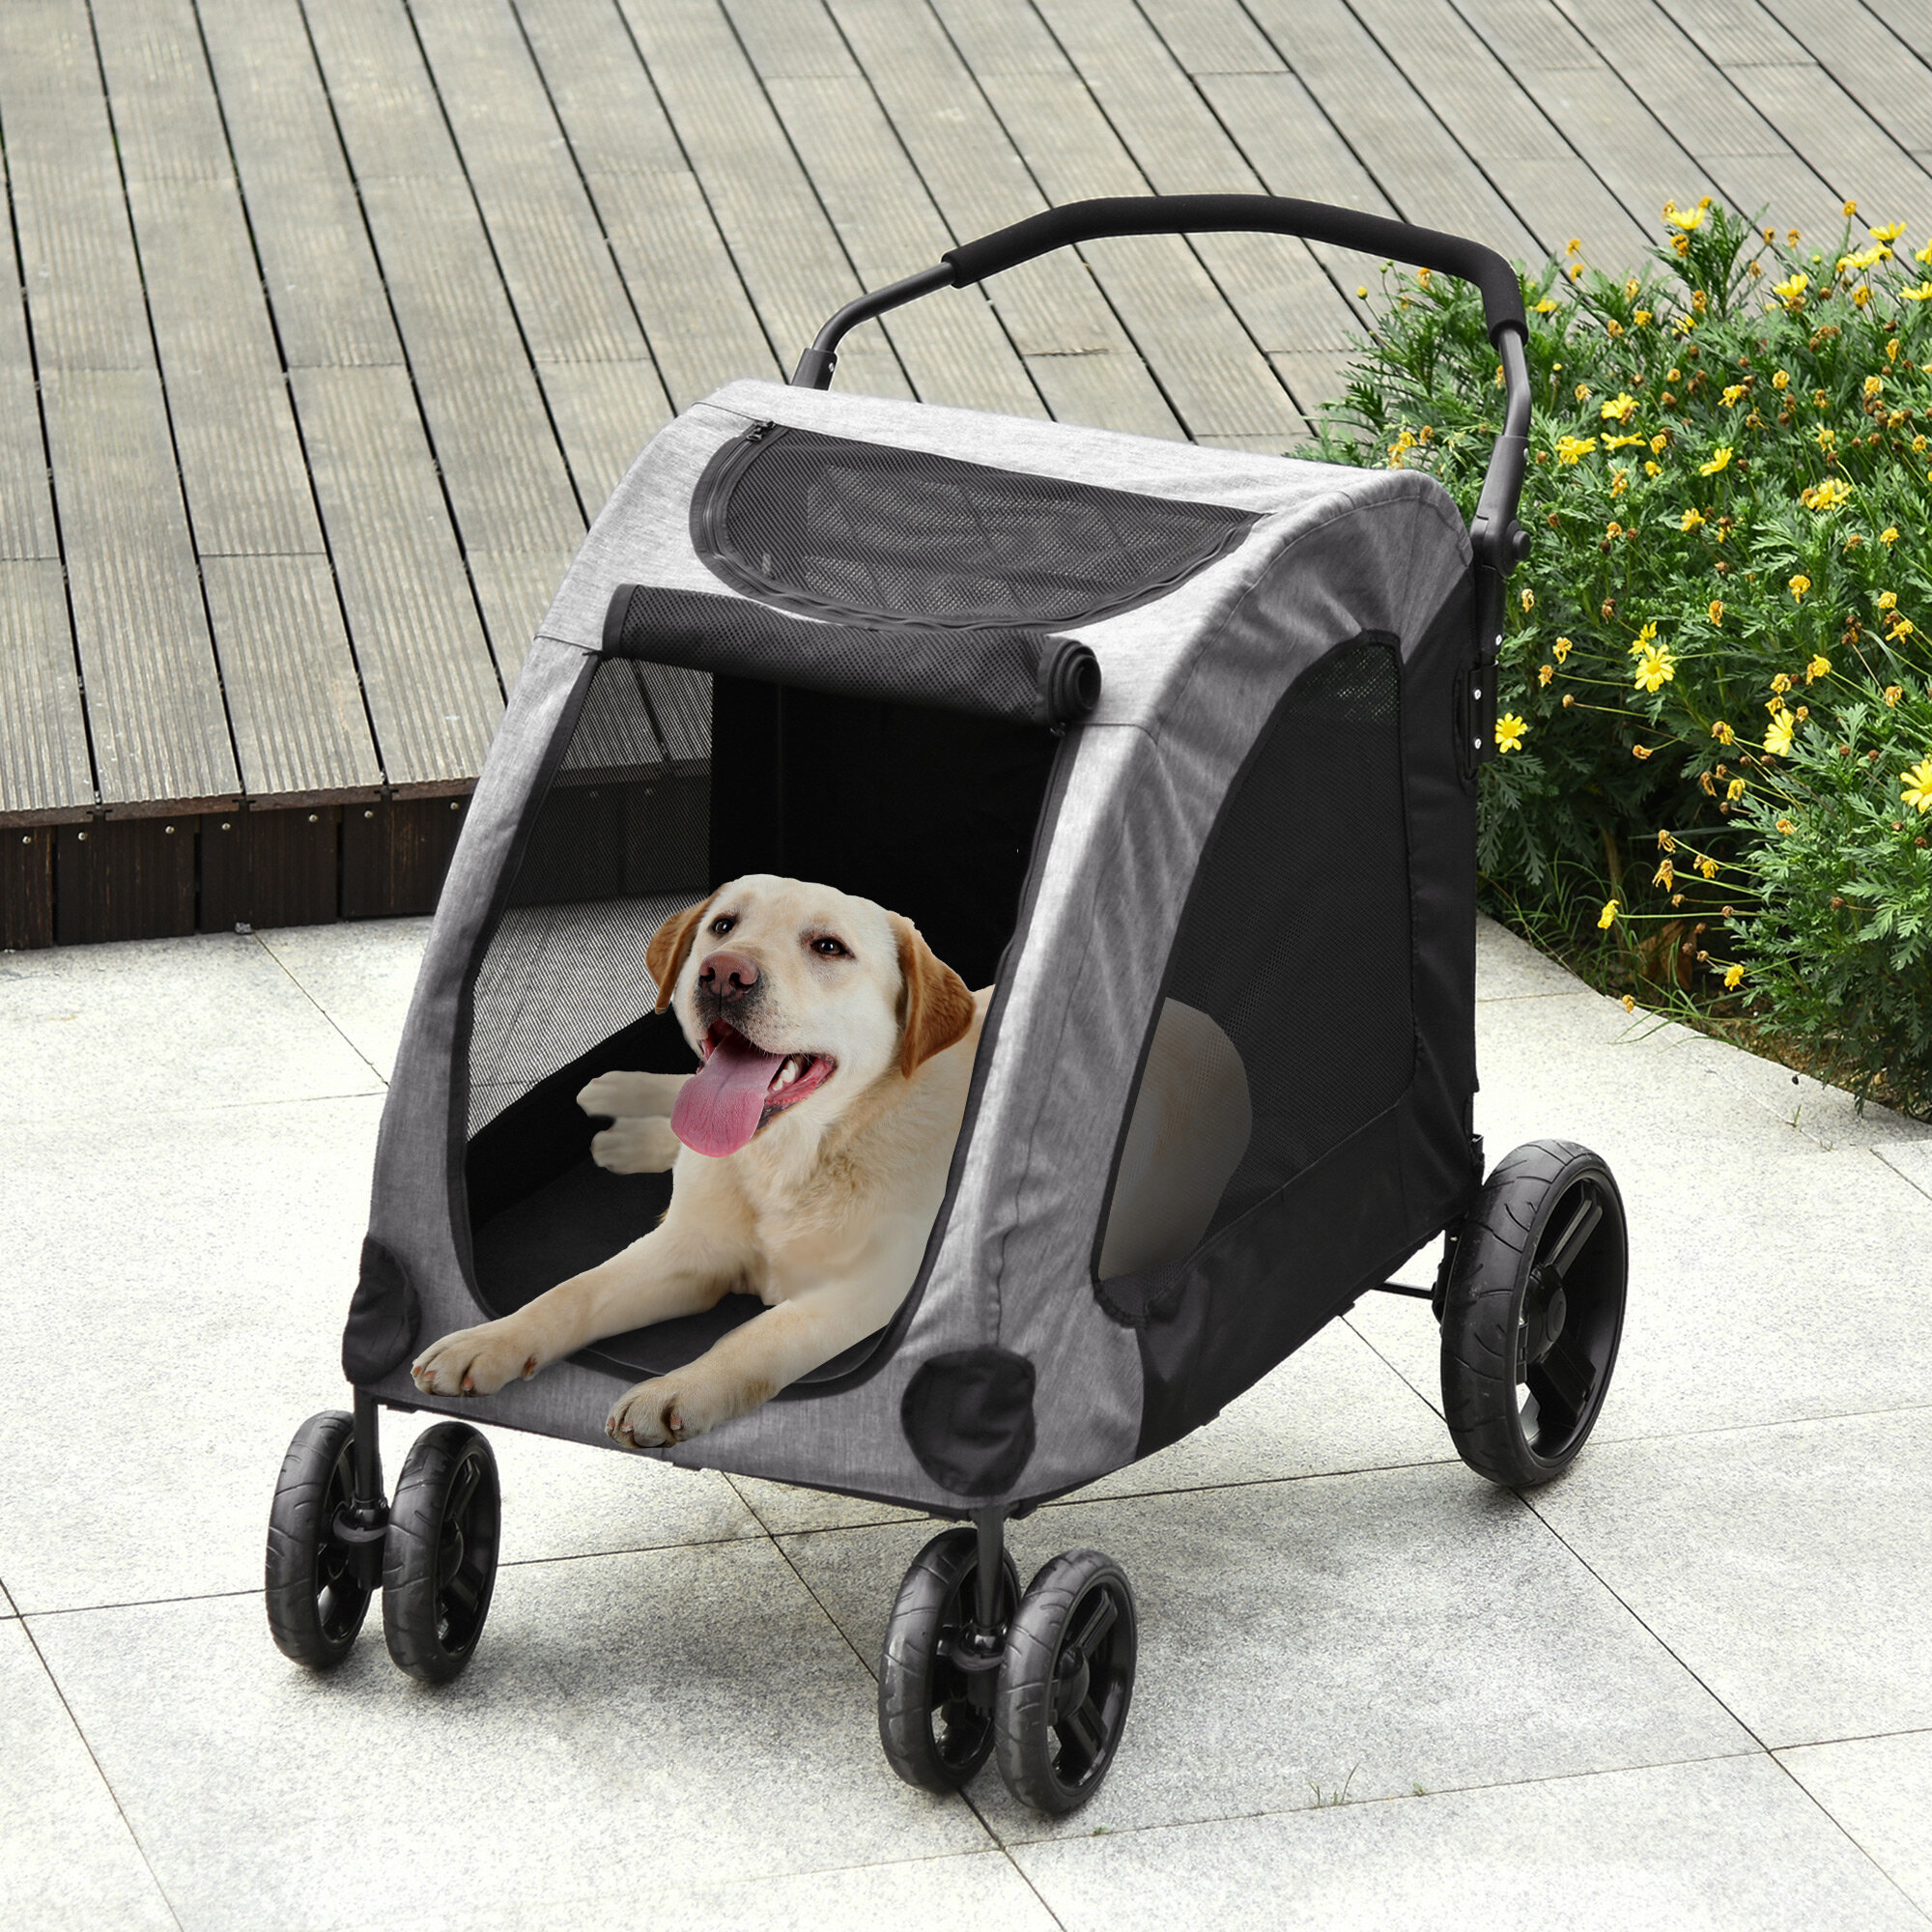 ANGELES HOME 32 1/2 in. x 23 in. Portable Folding Pet Carrier with